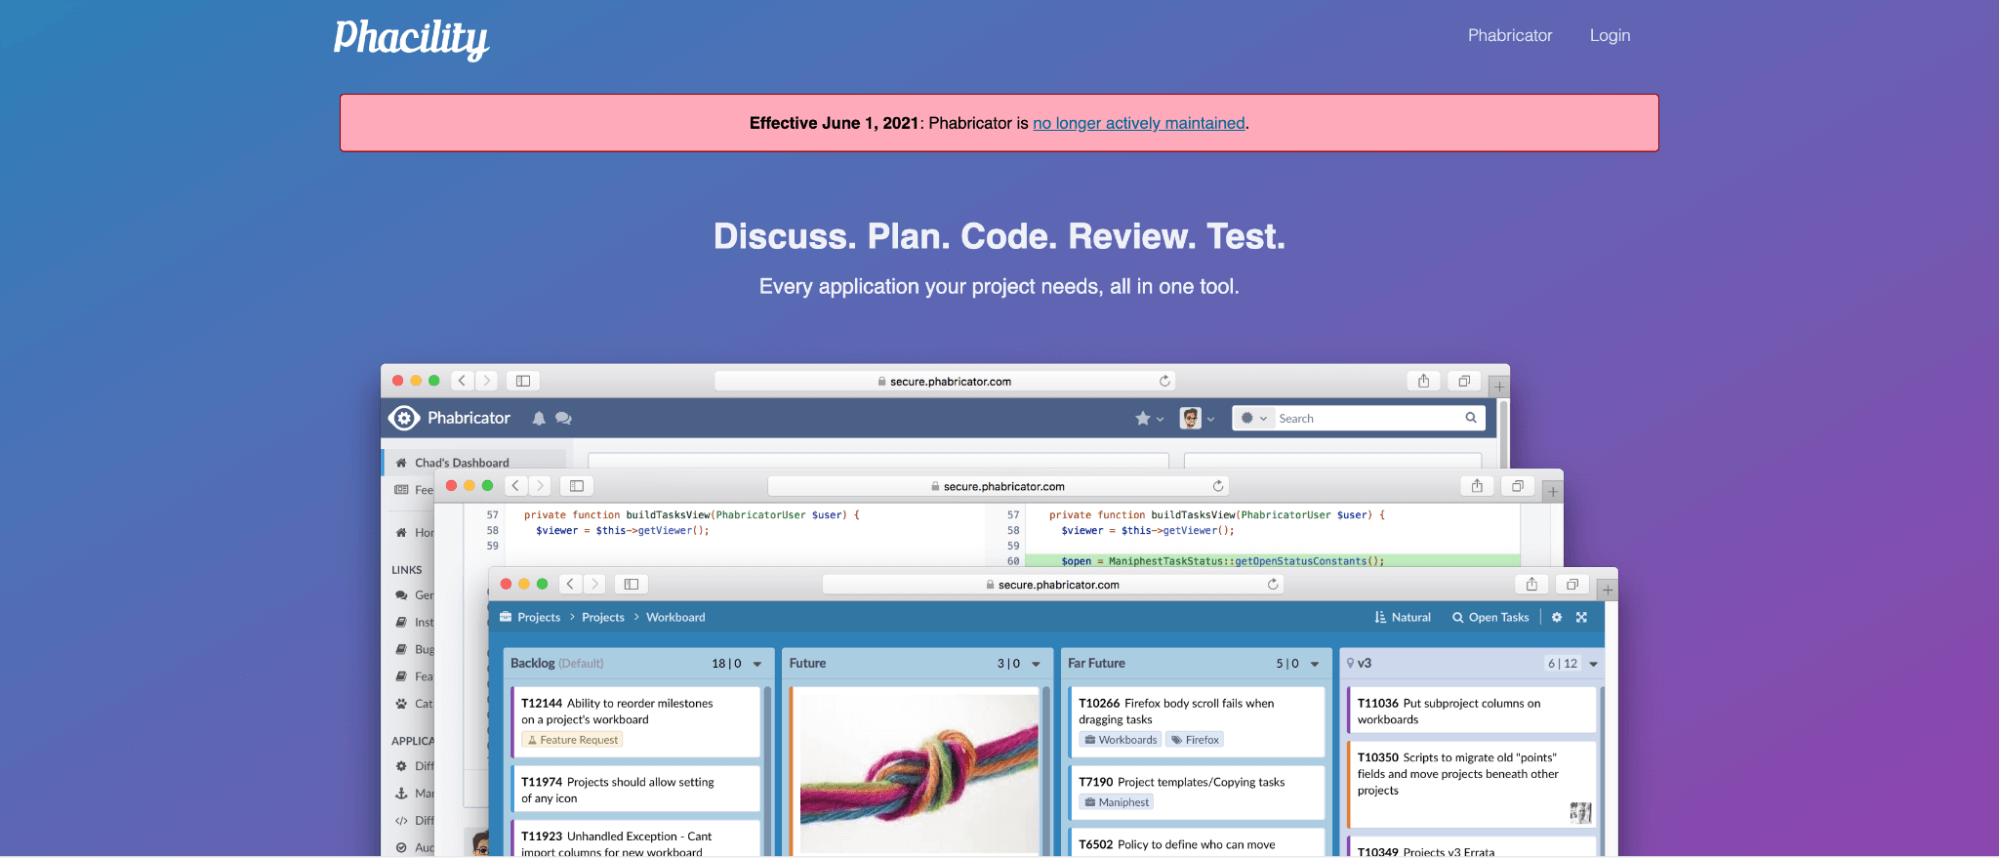 Phabricator landing page screenshot with copy "Discuss. Plan. Code. Review. Test."